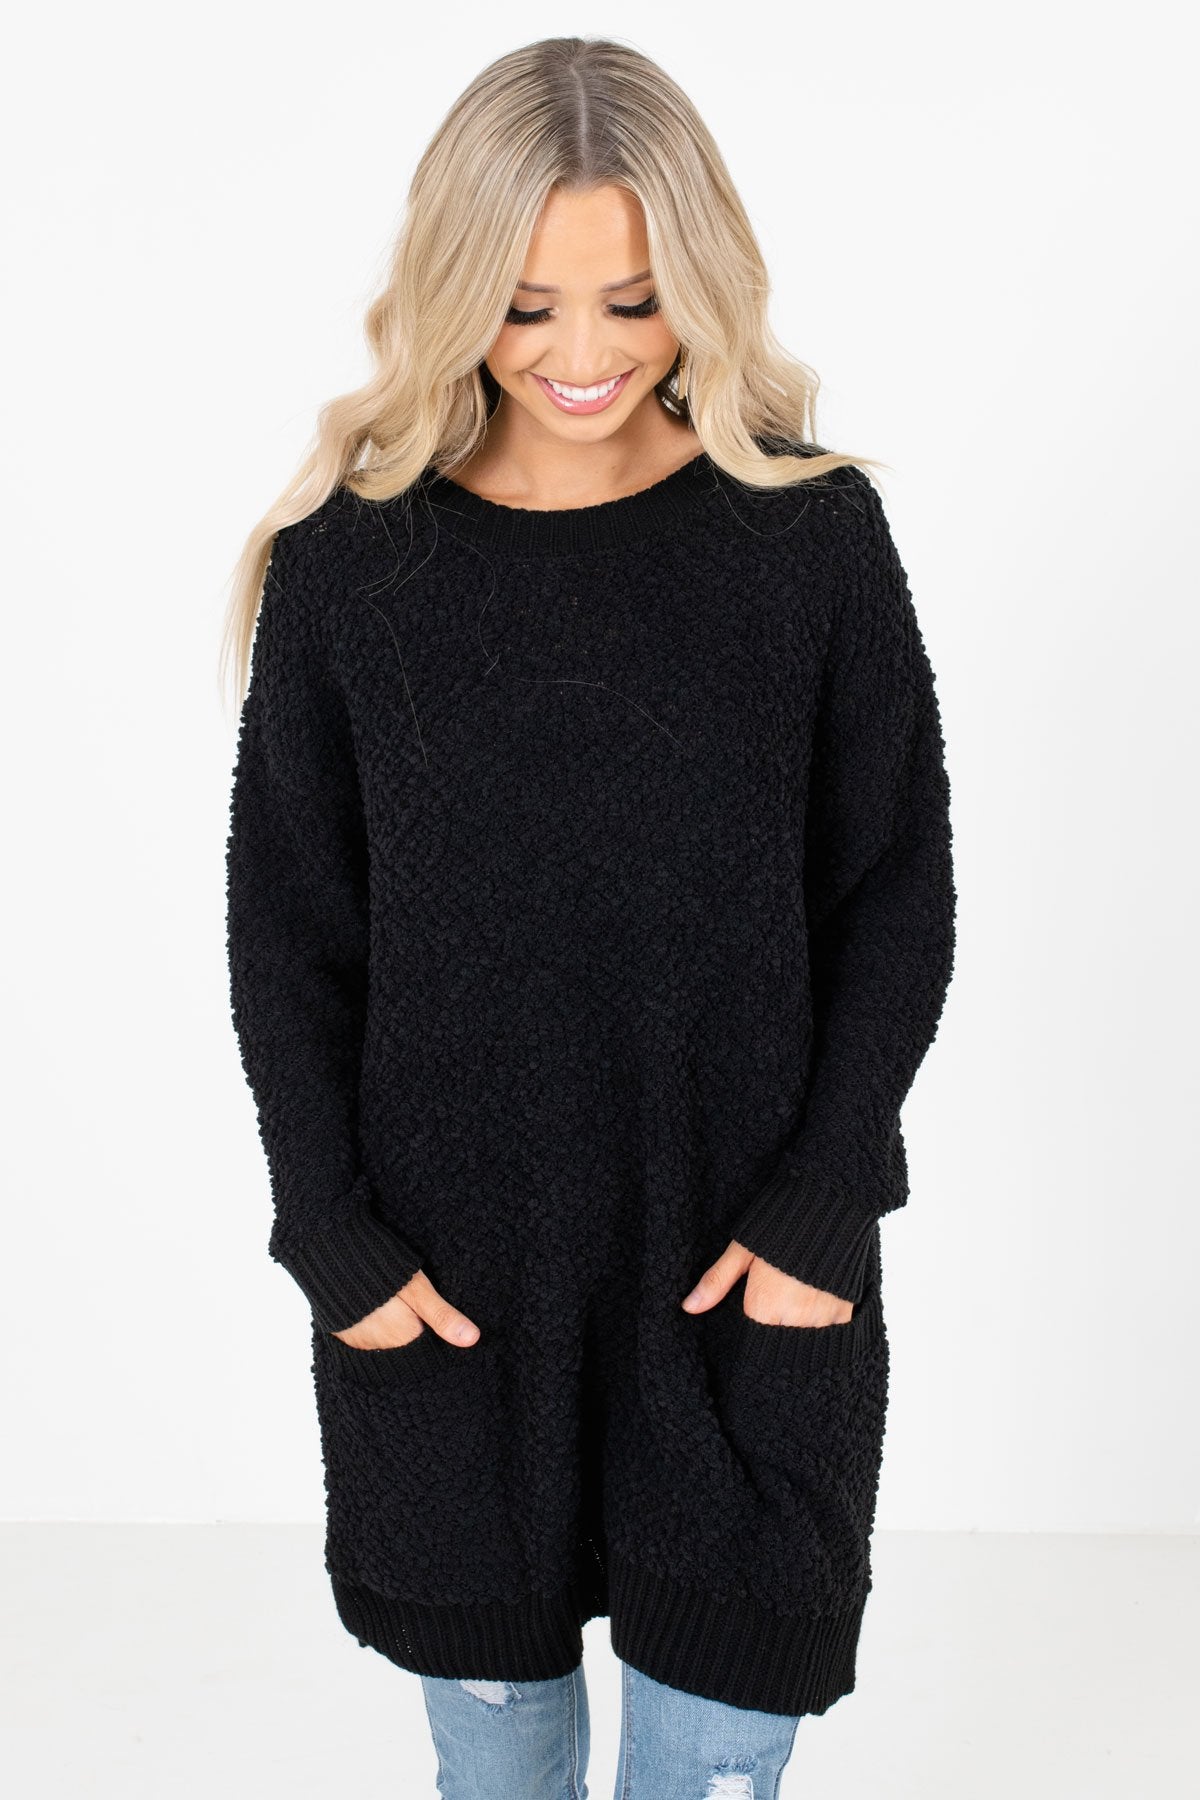 Women's Black Casual Everyday Boutique Sweater